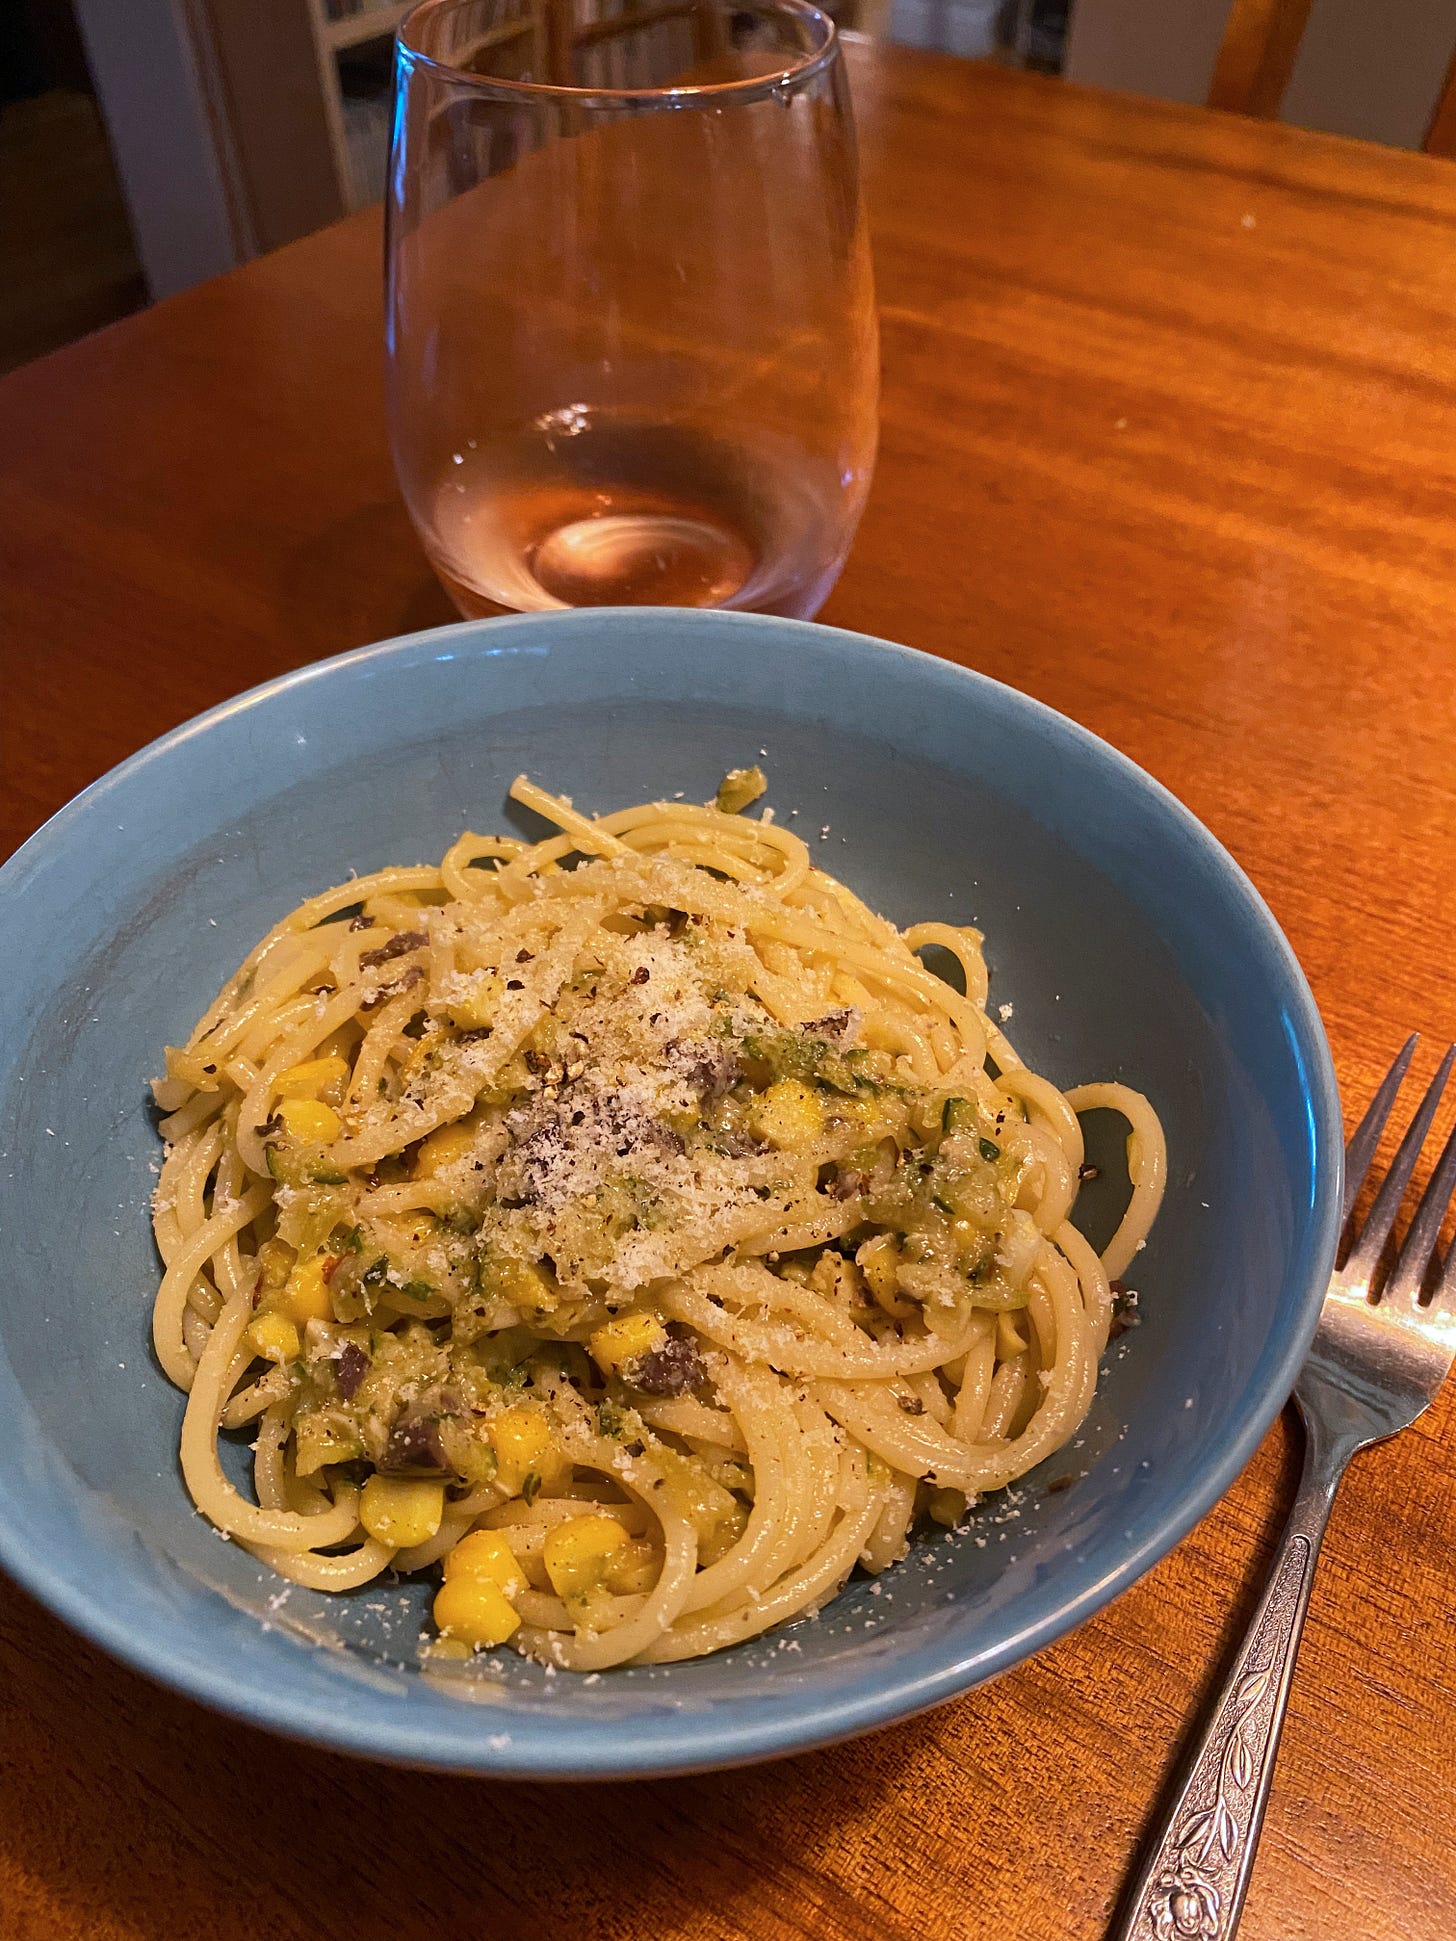 A blue bowl of spaghetti with zucchini, chopped olives, and corn. On top is a dusting of parmesan and cracked pepper. A stemless glass of rosé is on the table in the background.